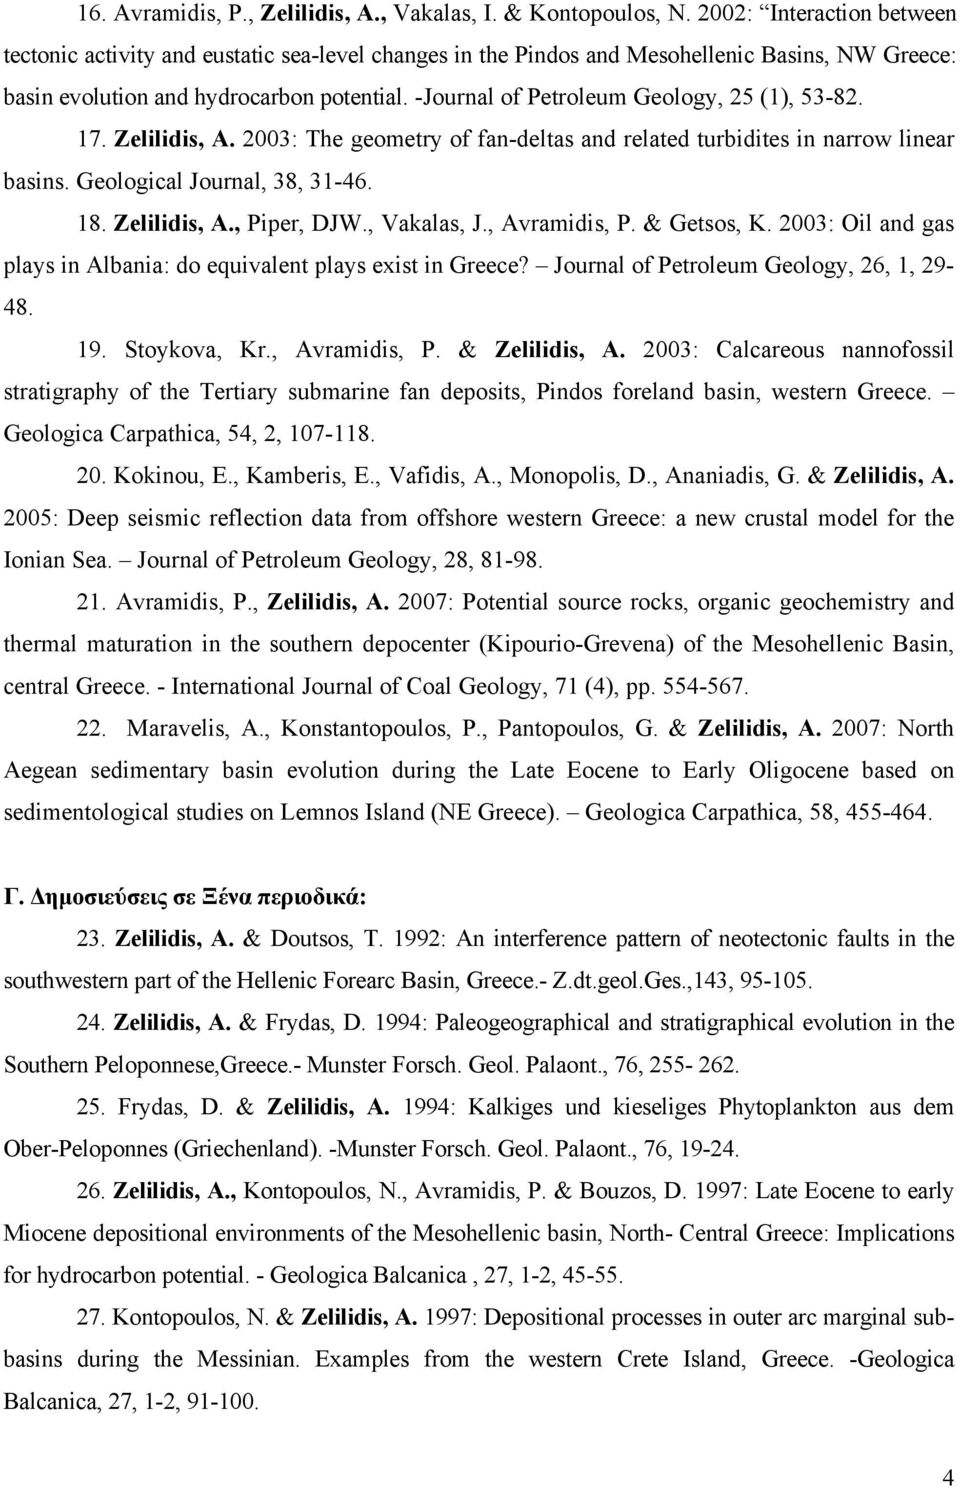 -Journal of Petroleum Geology, 25 (1), 53-82. 17. Zelilidis, A. 2003: The geometry of fan-deltas and related turbidites in narrow linear basins. Geological Journal, 38, 31-46. 18. Zelilidis, A., Piper, DJW.